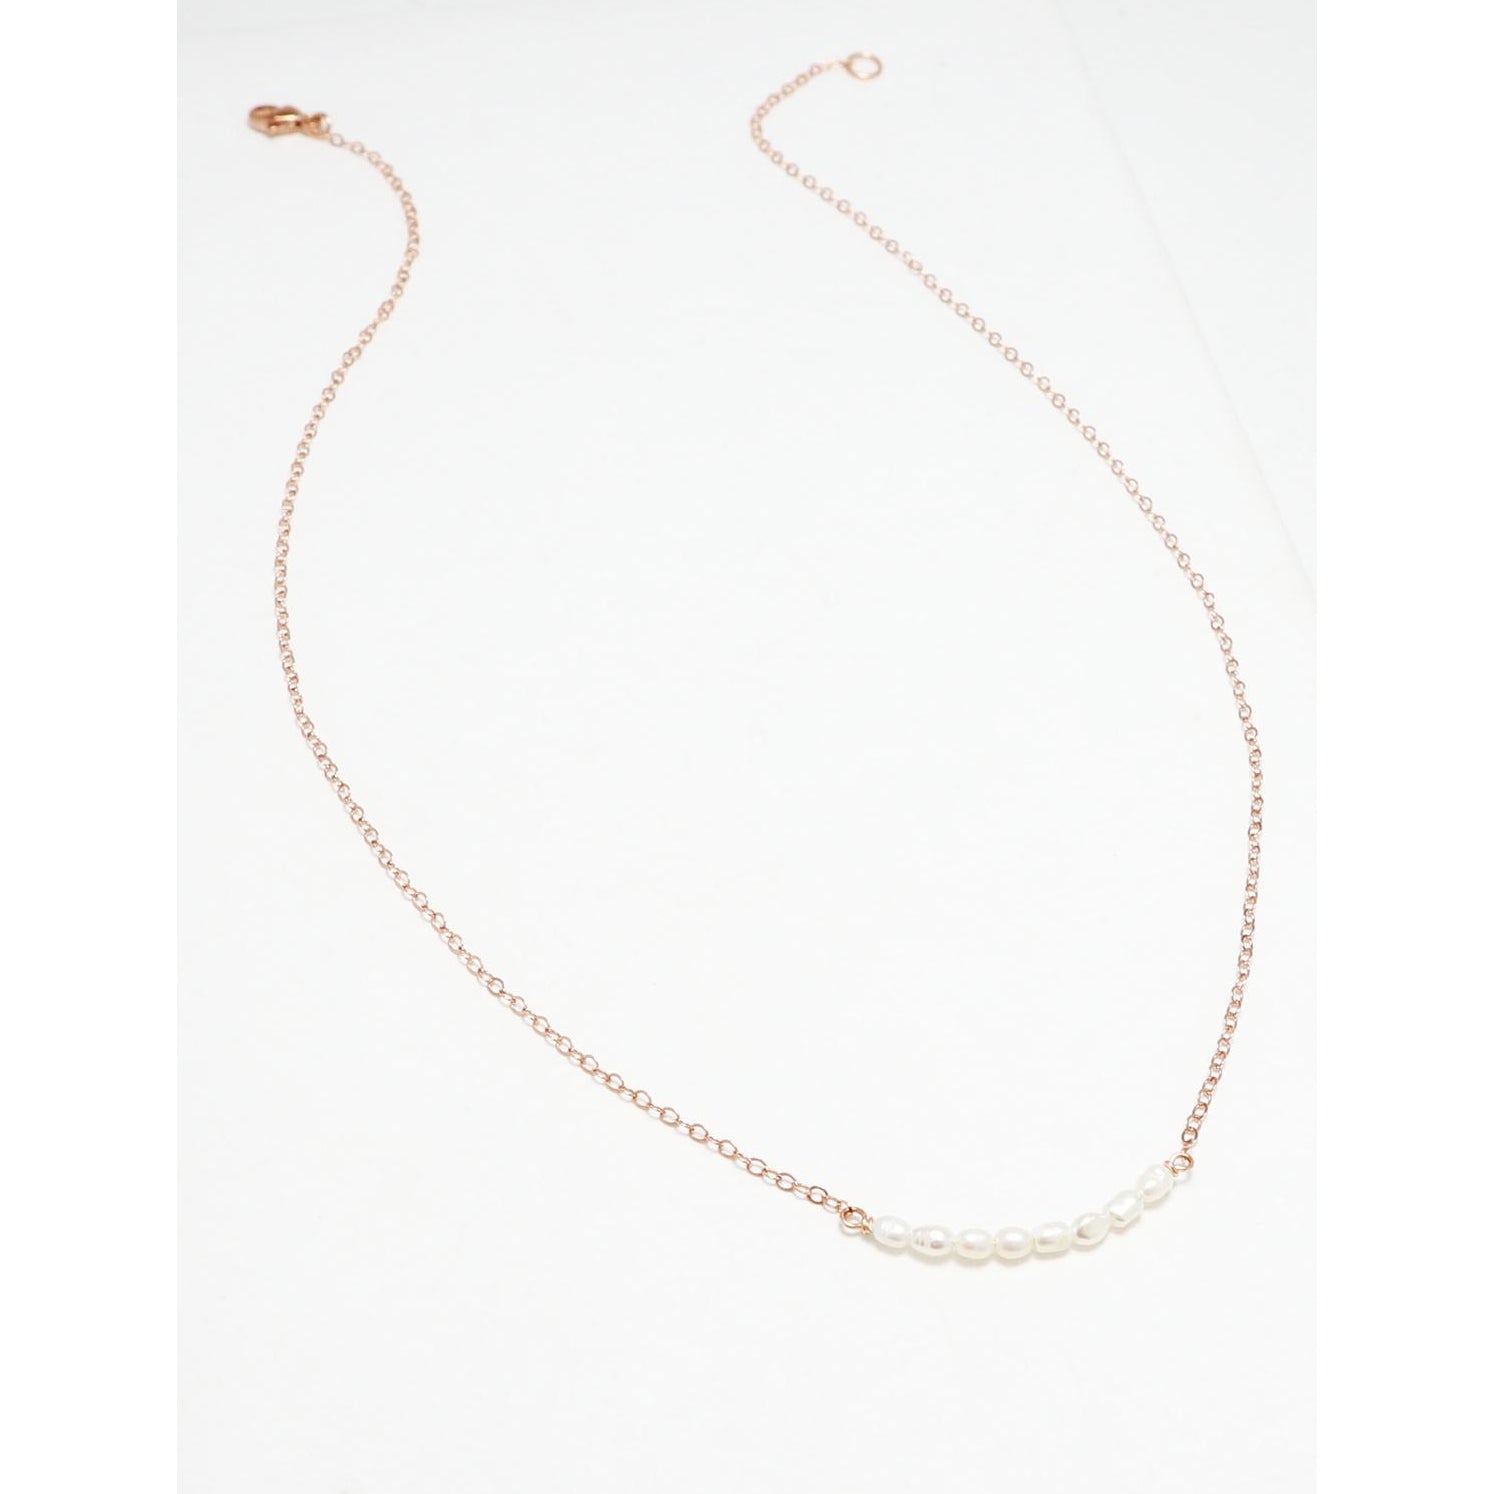 The June Necklace No. II